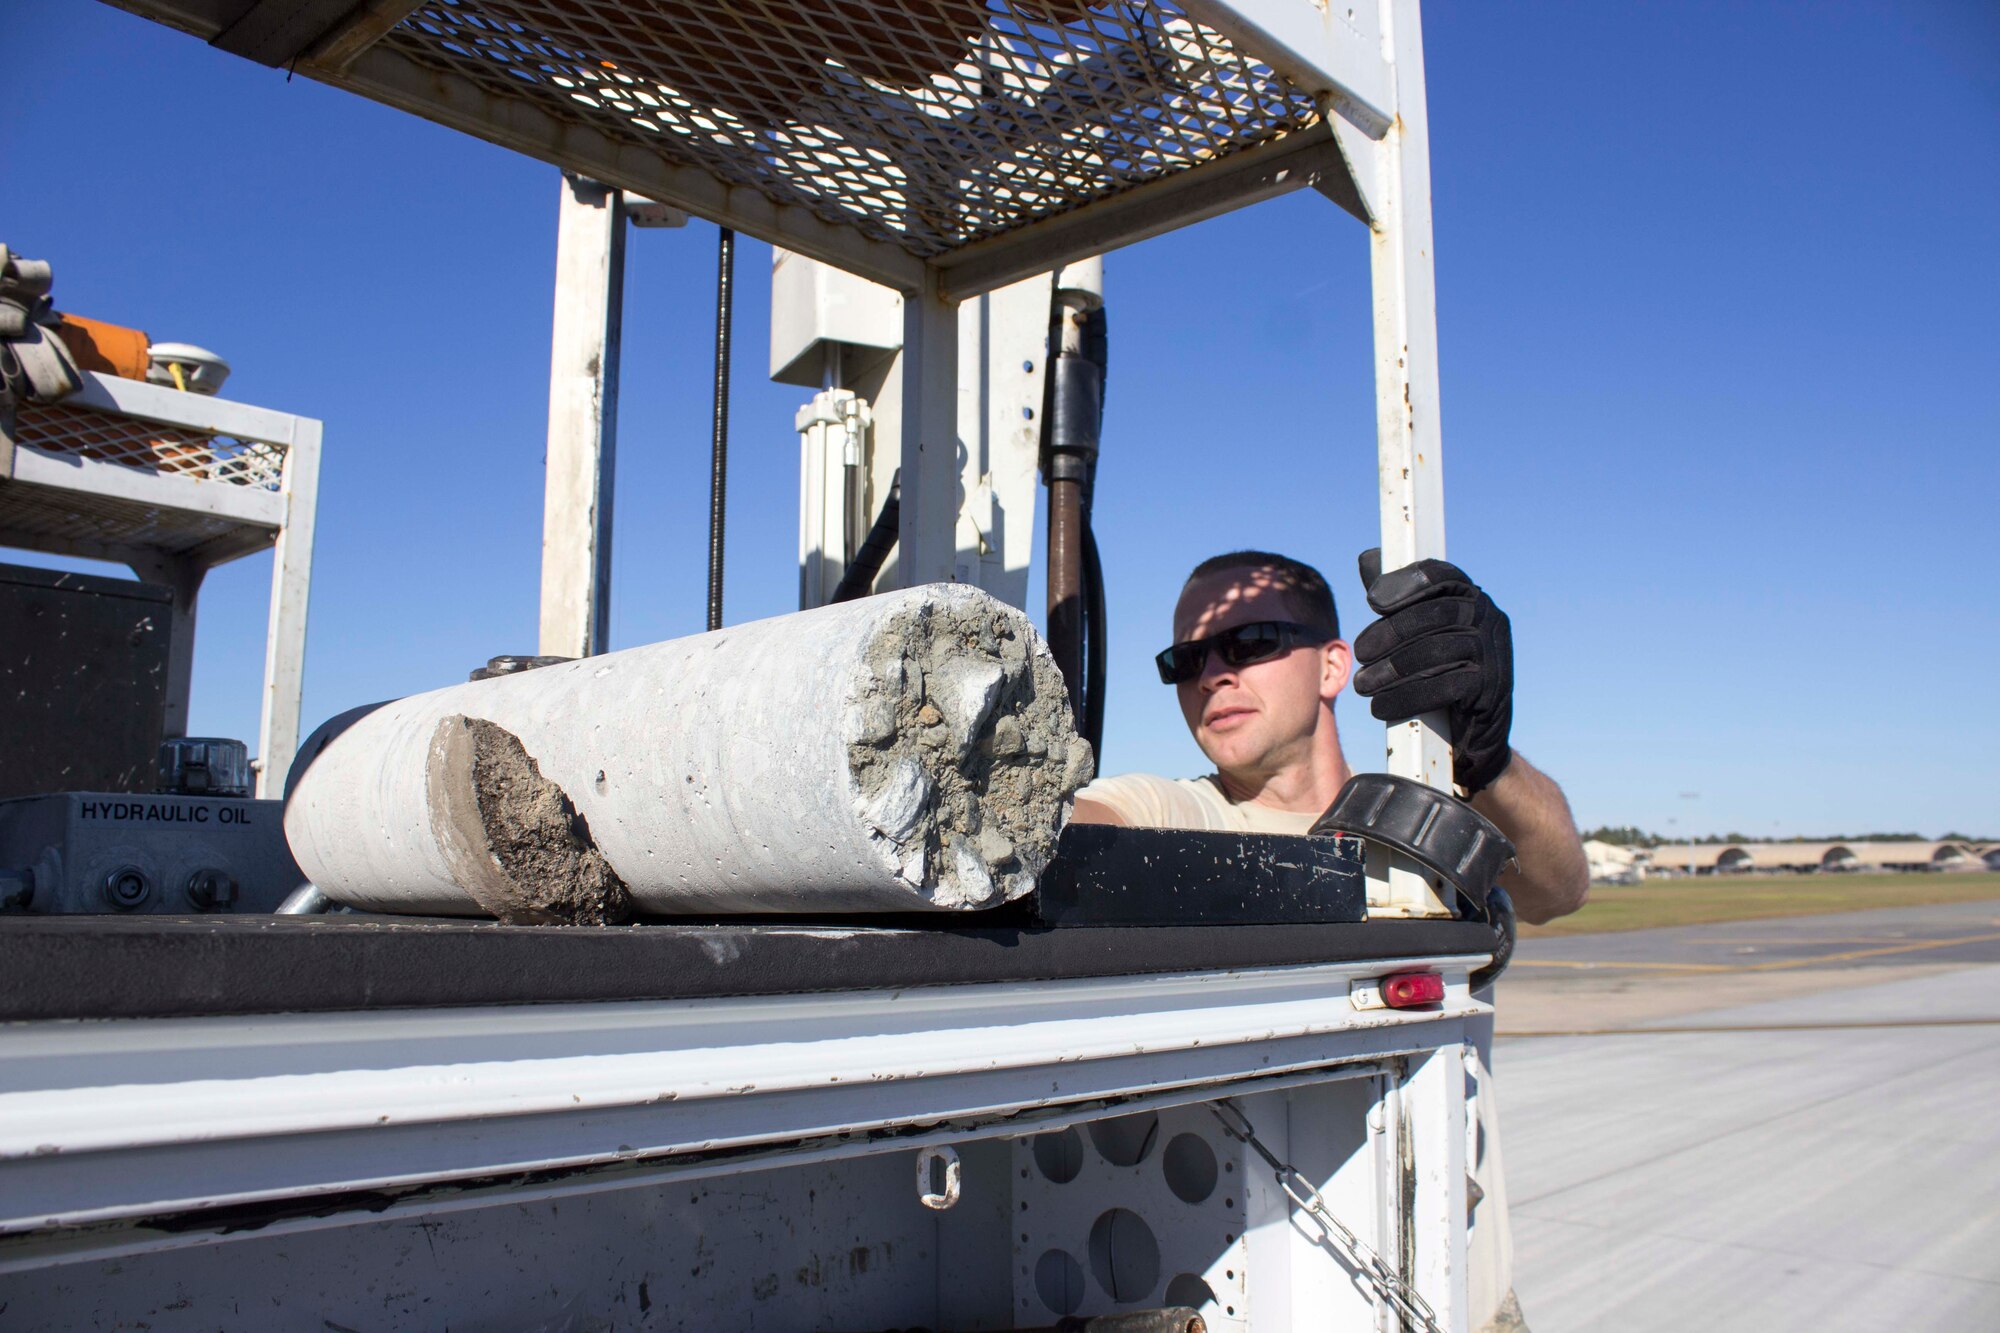 Staff Sgt. Eric Carpenter of the APE team stabilizes a core sample taken from Seymour Johnson Air Force Base, North Carolina, during a recent airfield pavement evaluation provided in response to flooding from Hurricane Matthew. The team traveled to the base to assess the runway for structural integrity concerns from the flooding. (U.S. Air Force Photo/Susan Lawson)

